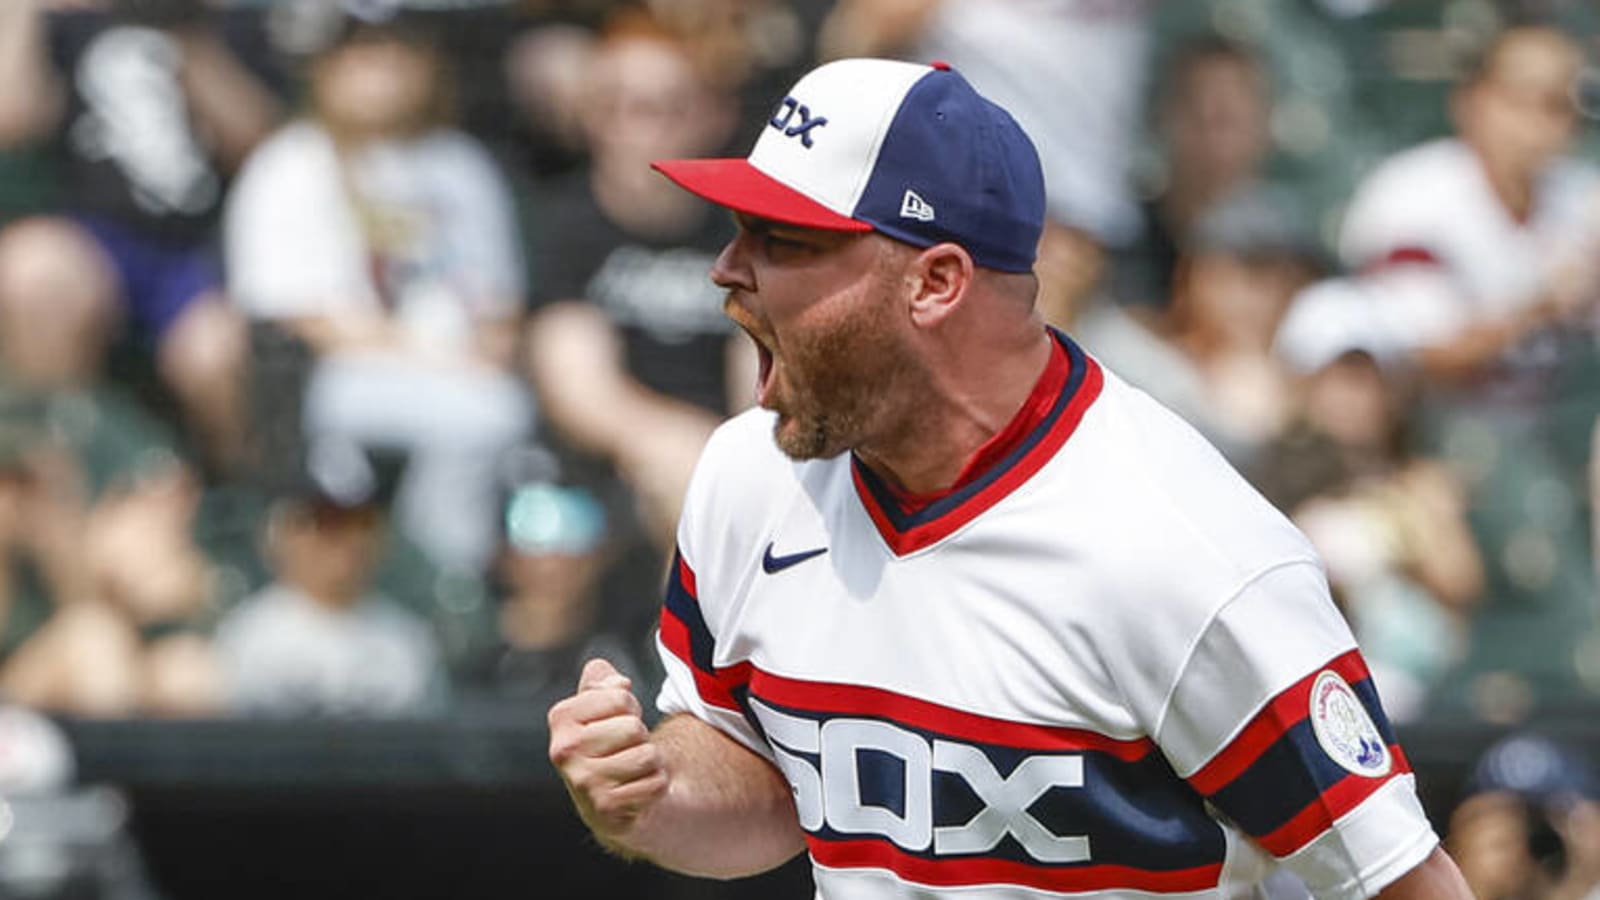 White Sox pitcher gets first win after returning from cancer battle